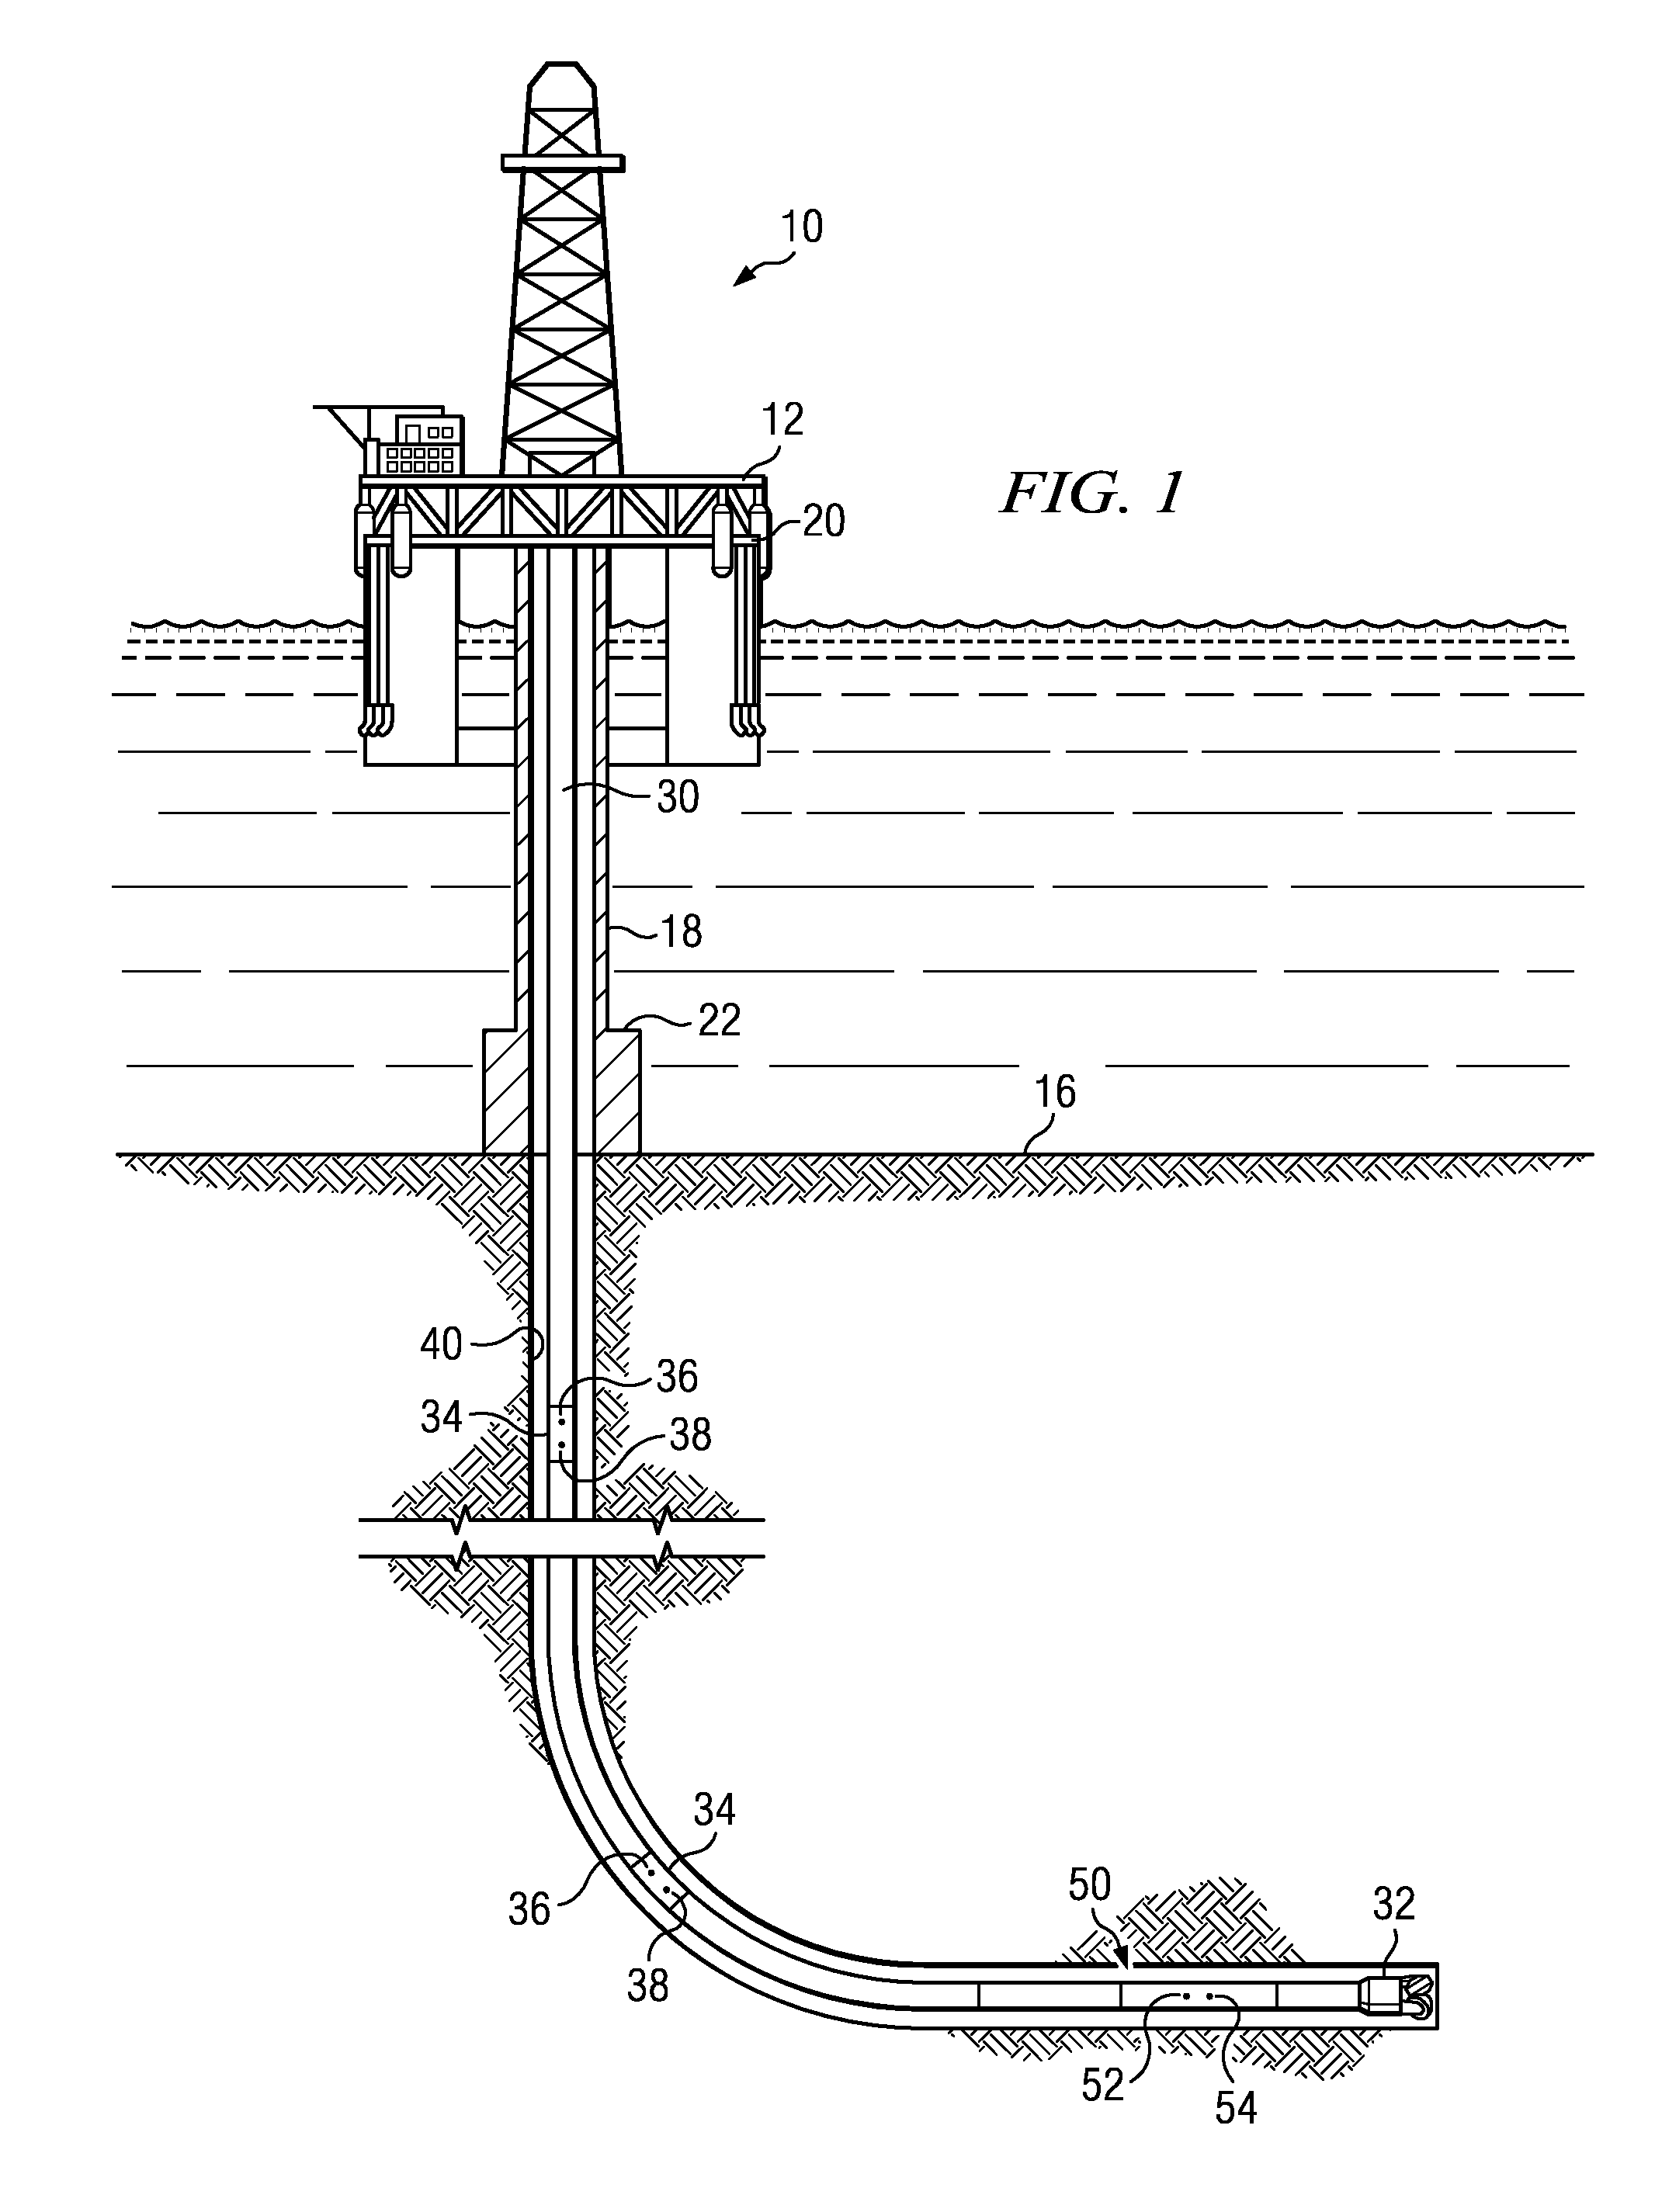 Methods for evaluating inflow and outflow in a subterraean wellbore